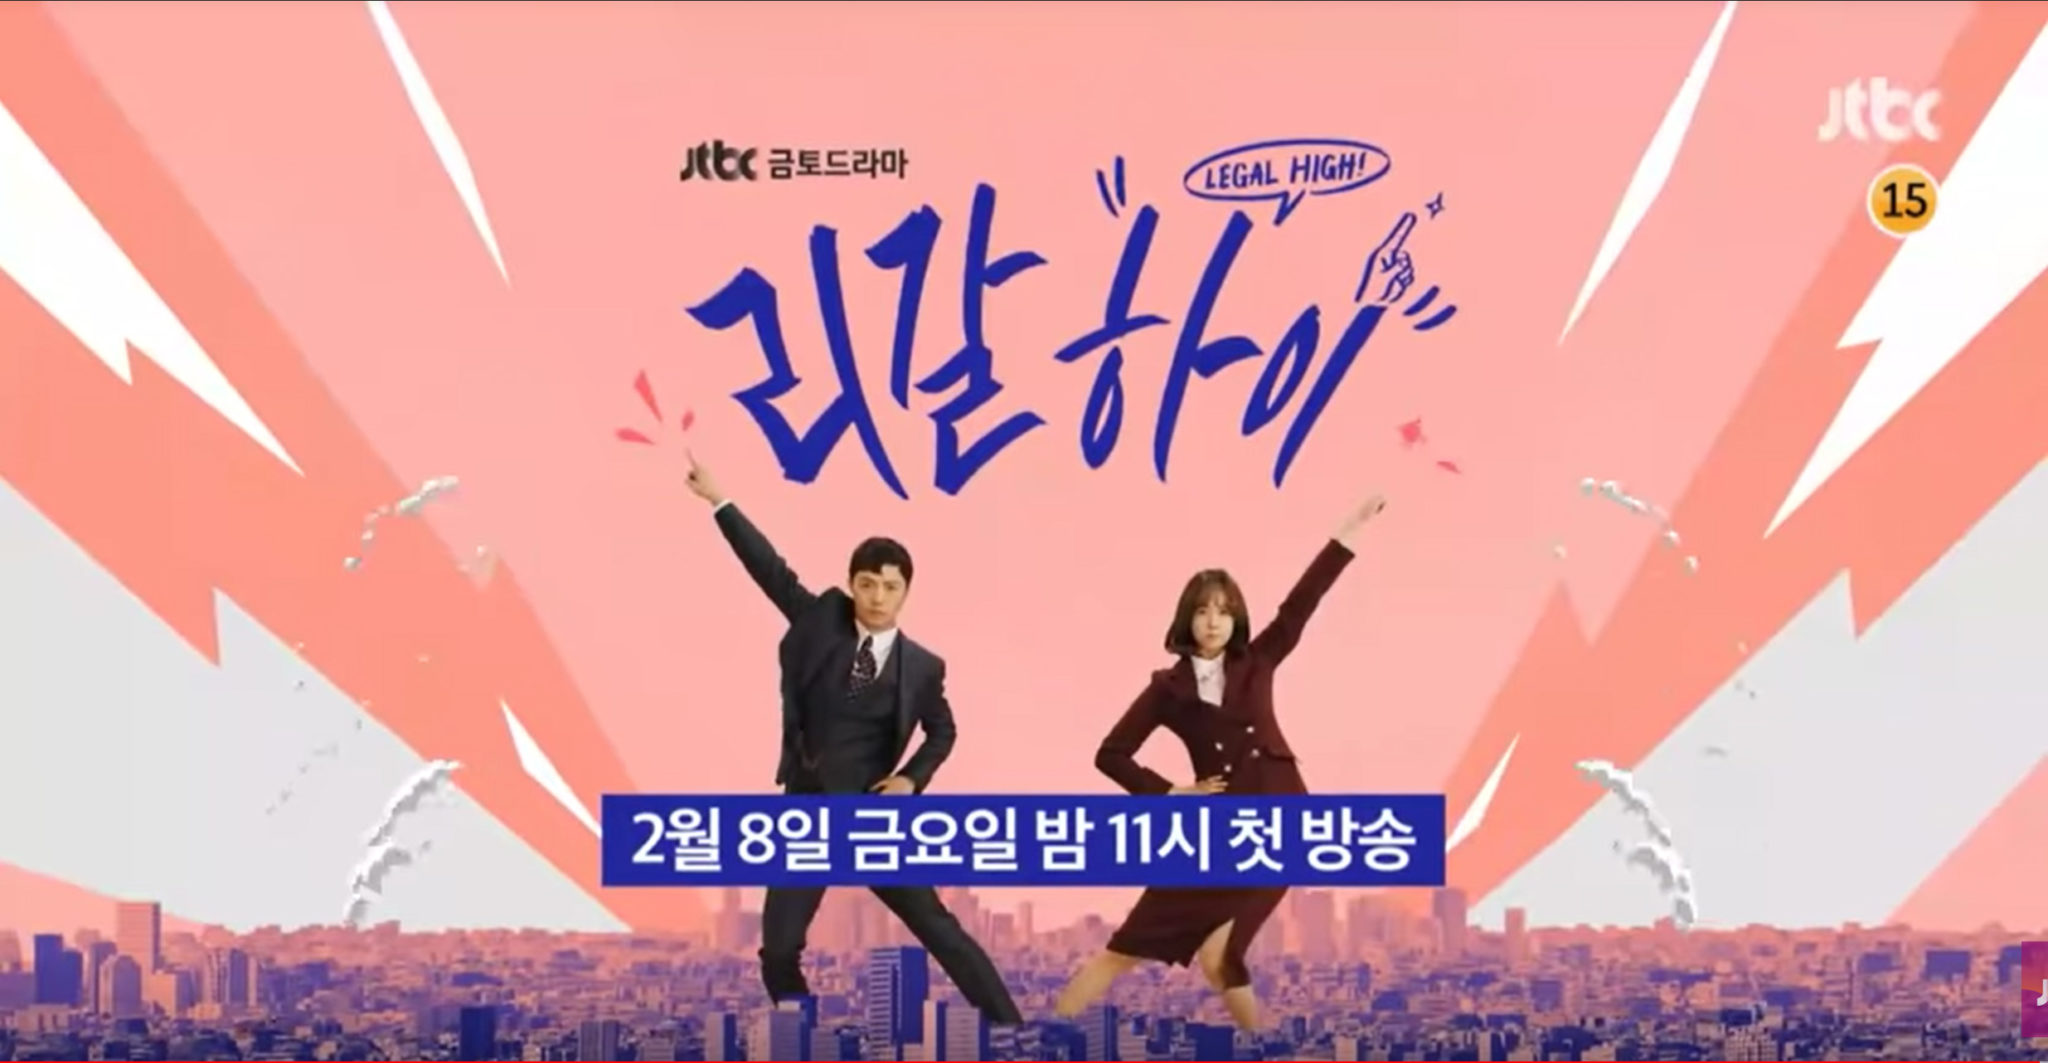 New promos for Legal High featuring Jin Gu as a weirdo lawyer and Seo Eun-soo as a fighter for justice